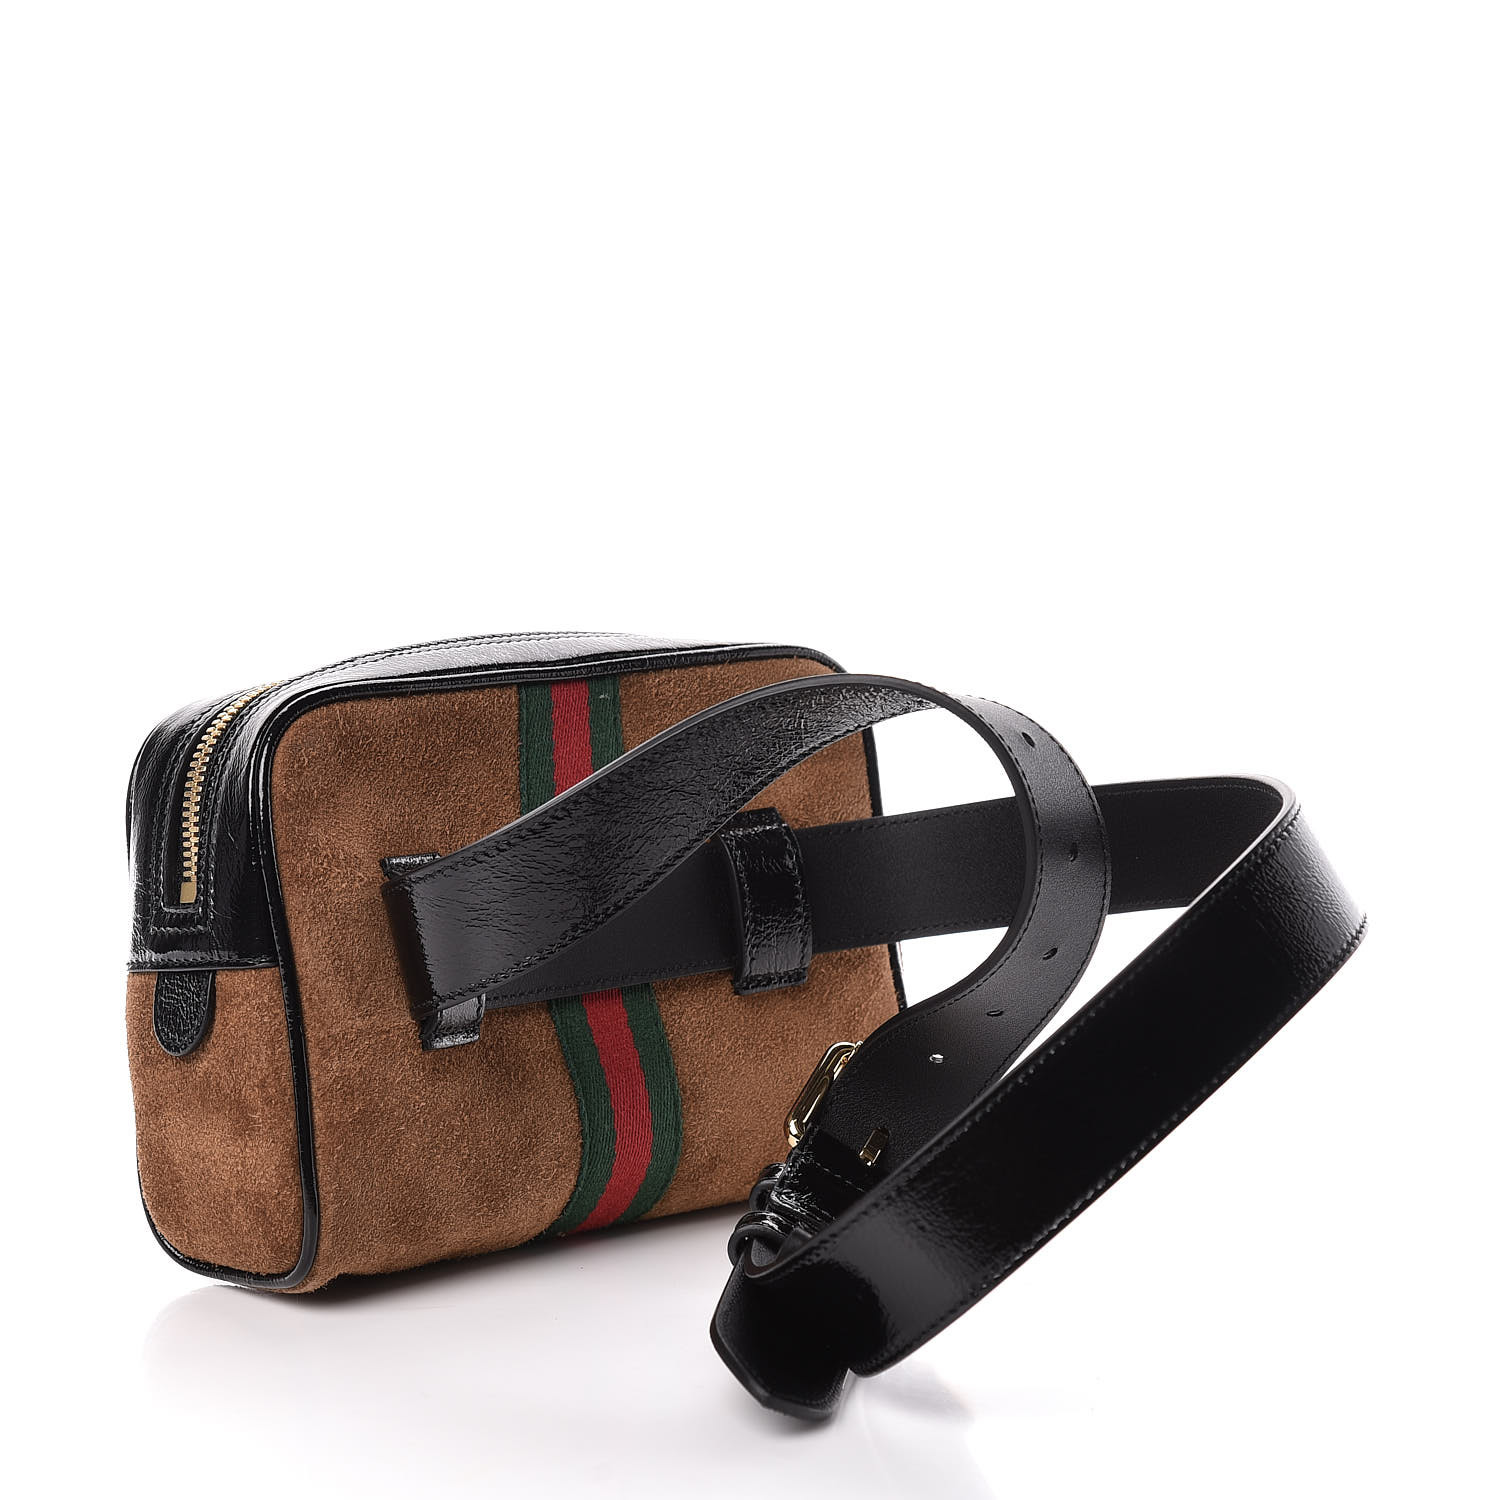 GUCCI Suede Small Ophidia Belt Bag 85 34 Brown 452111